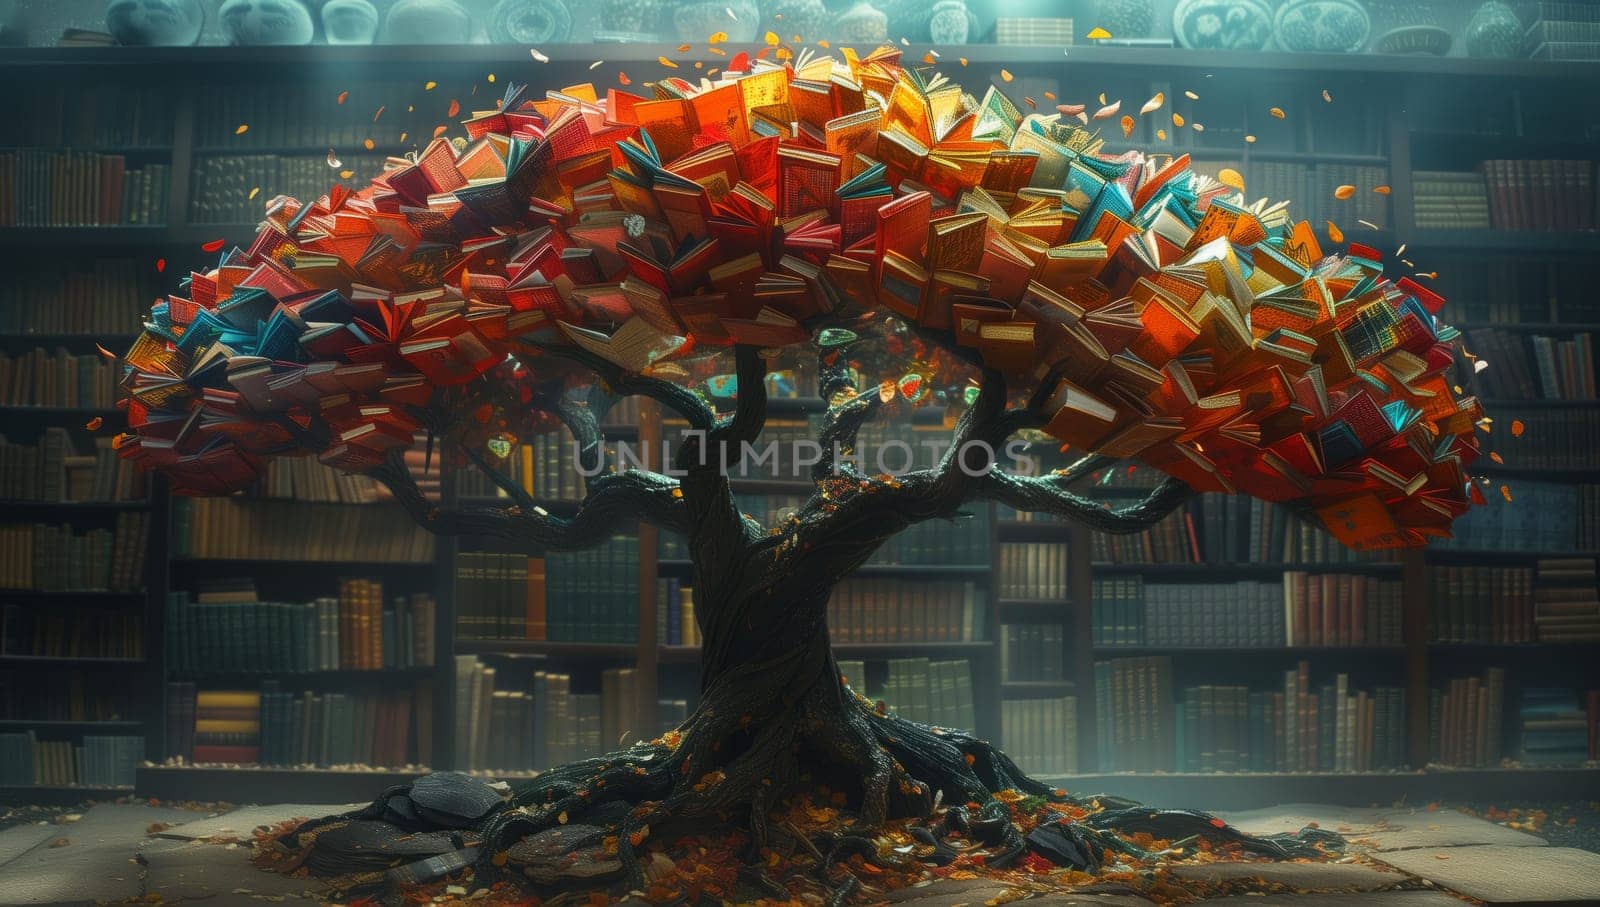 A tree plant growing inside a library building made of books by richwolf